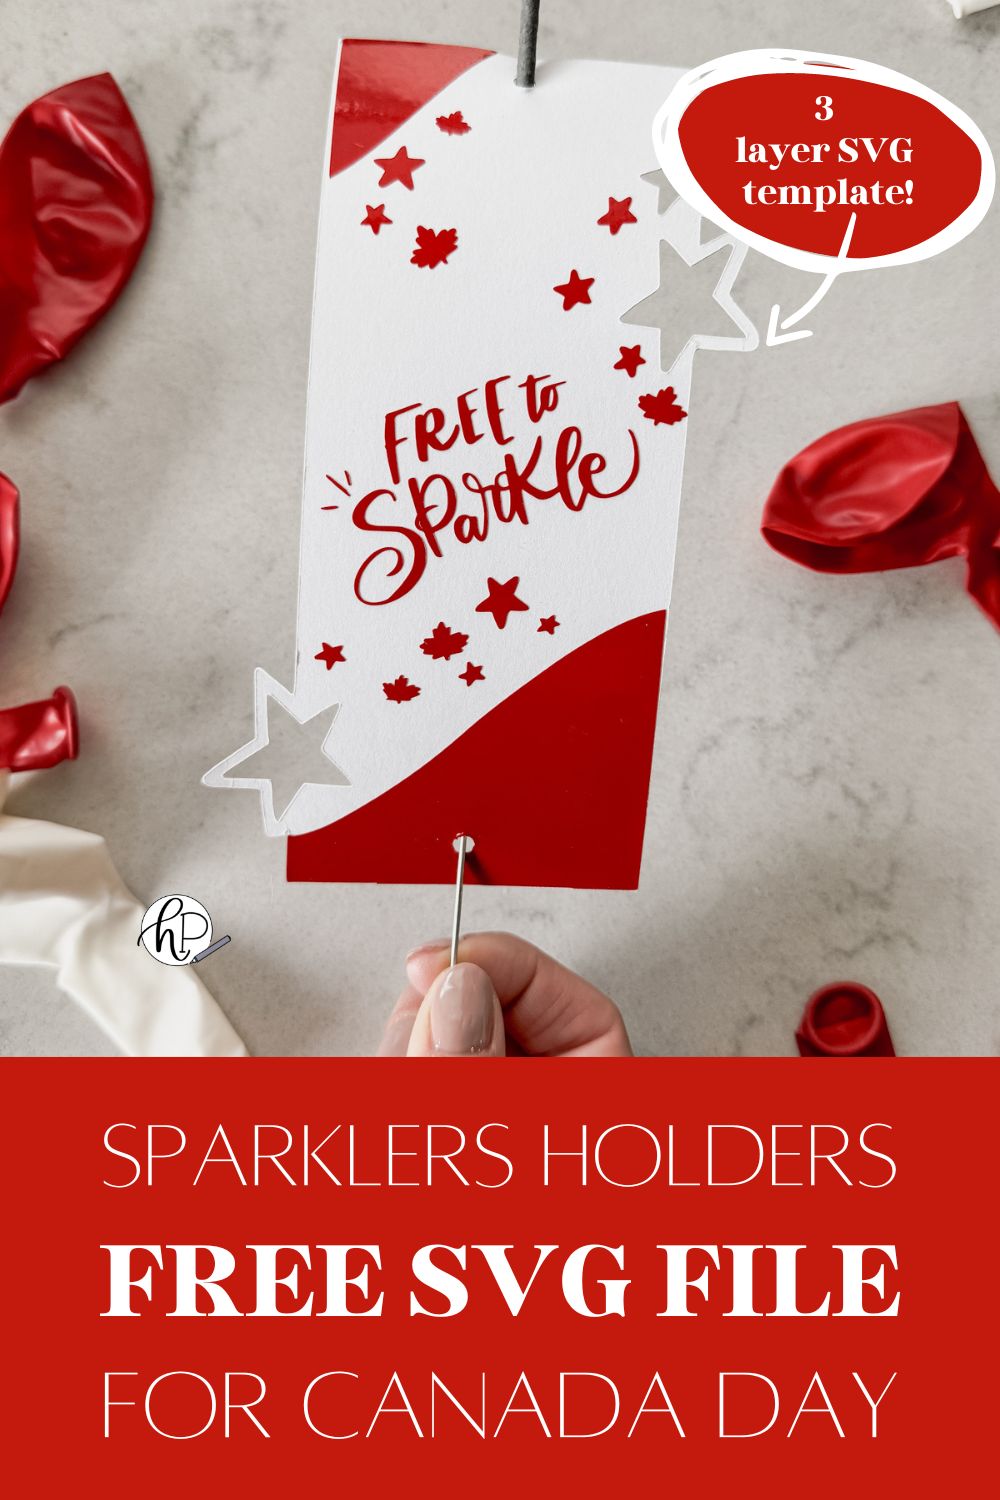 image of sparkler holder made with cricut- design has stars and maple leaves and the hand lettering 'free to sparkle' sparkler holder shown held over marble countertop with red and white balloons text overlay reads: sparklers holders free SVG file for canada day, 3 layer SVG template!